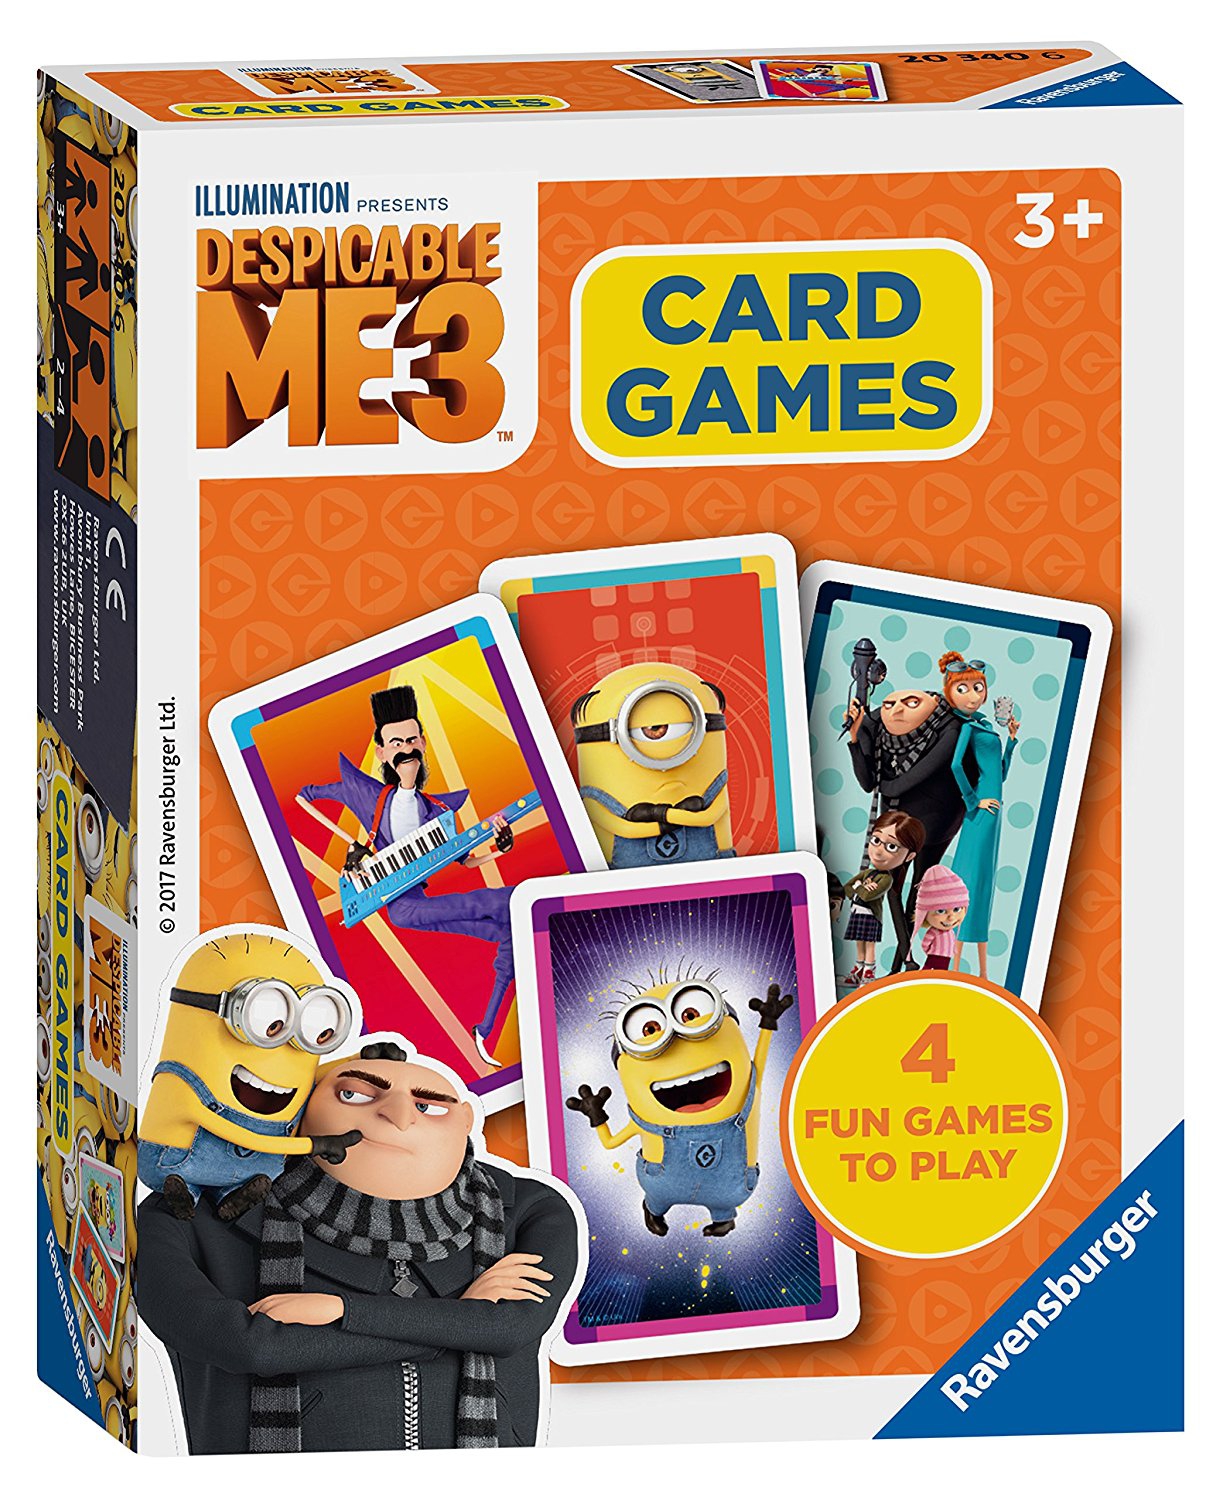 Despicable Me 3 'Minions' Card Games Game